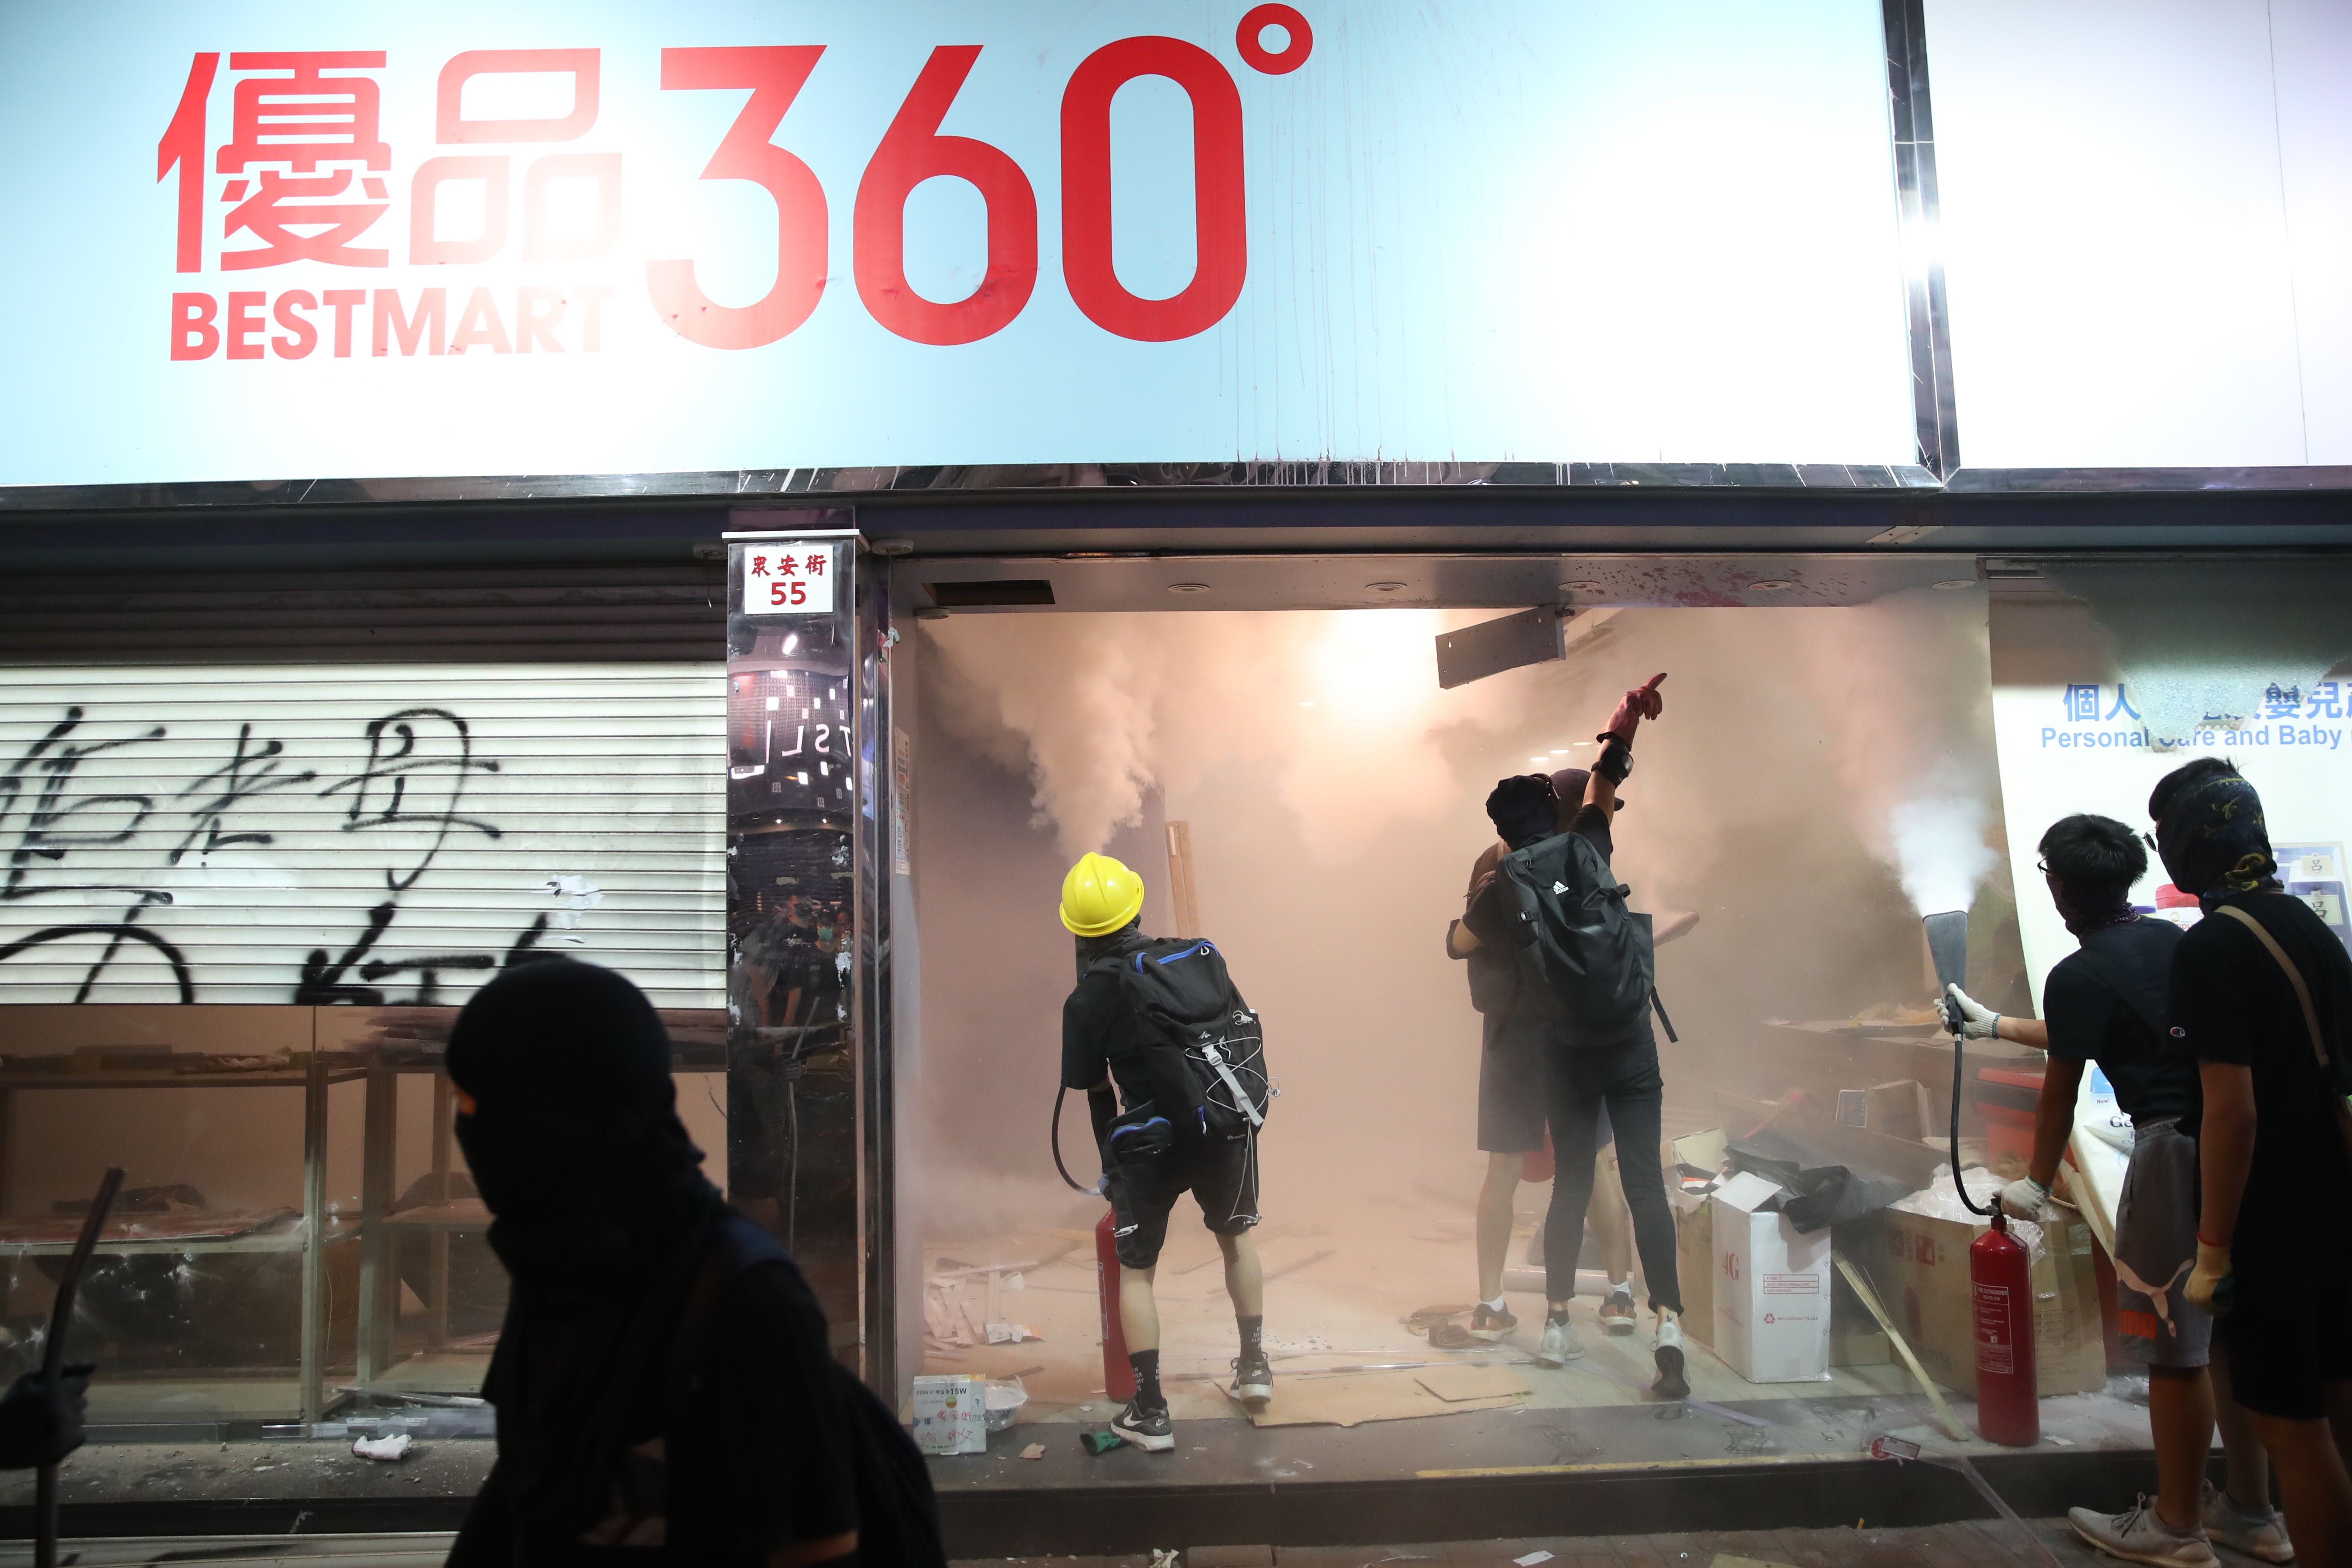 Hong protests: 59 Mart 360 shops vandalised in recent months, company reveals | South China Morning Post